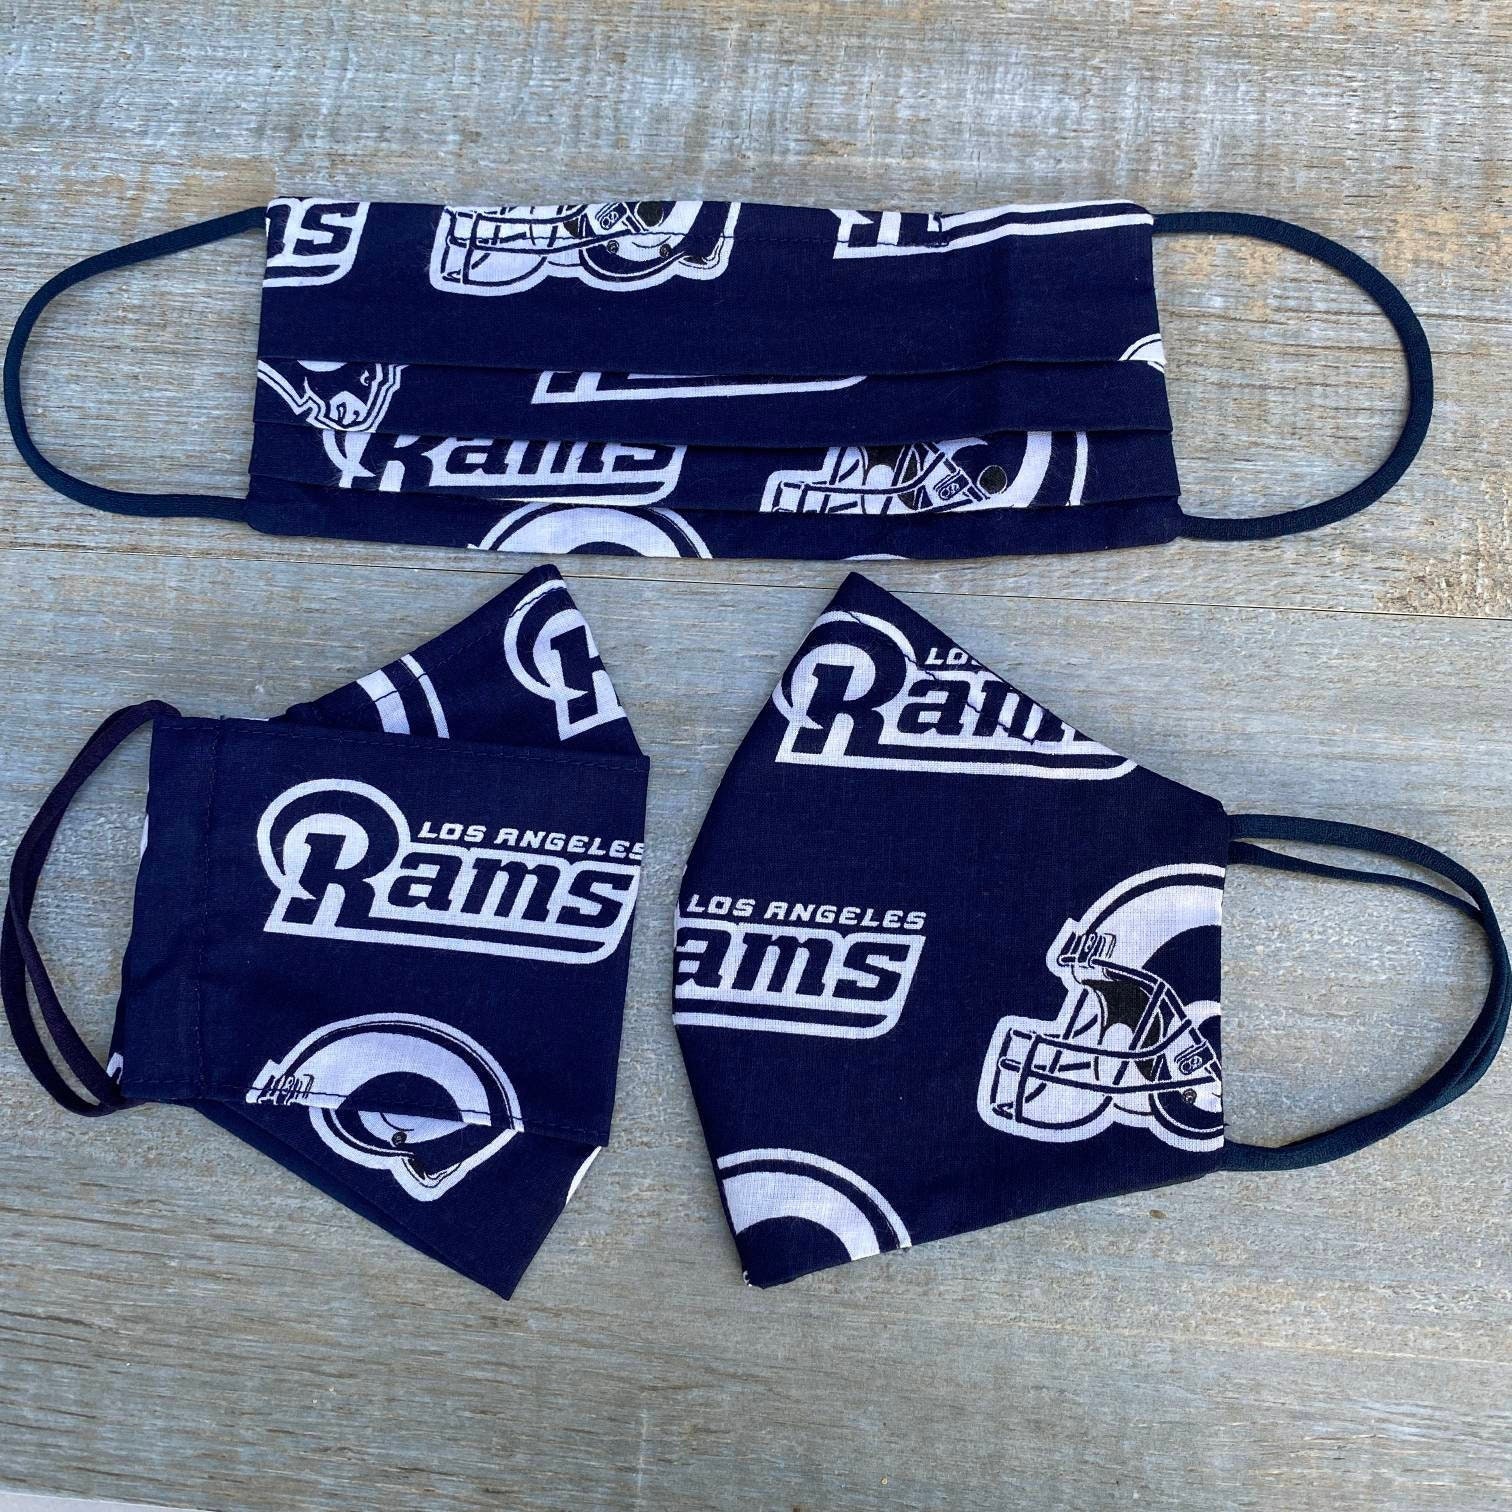 Los Angeles Rams Reusable Face Mask - Handmade in The Usa, 100% Cotton, Encased Nose Wire, Adjustable Soft Elastic Ear Loop, Two Layers